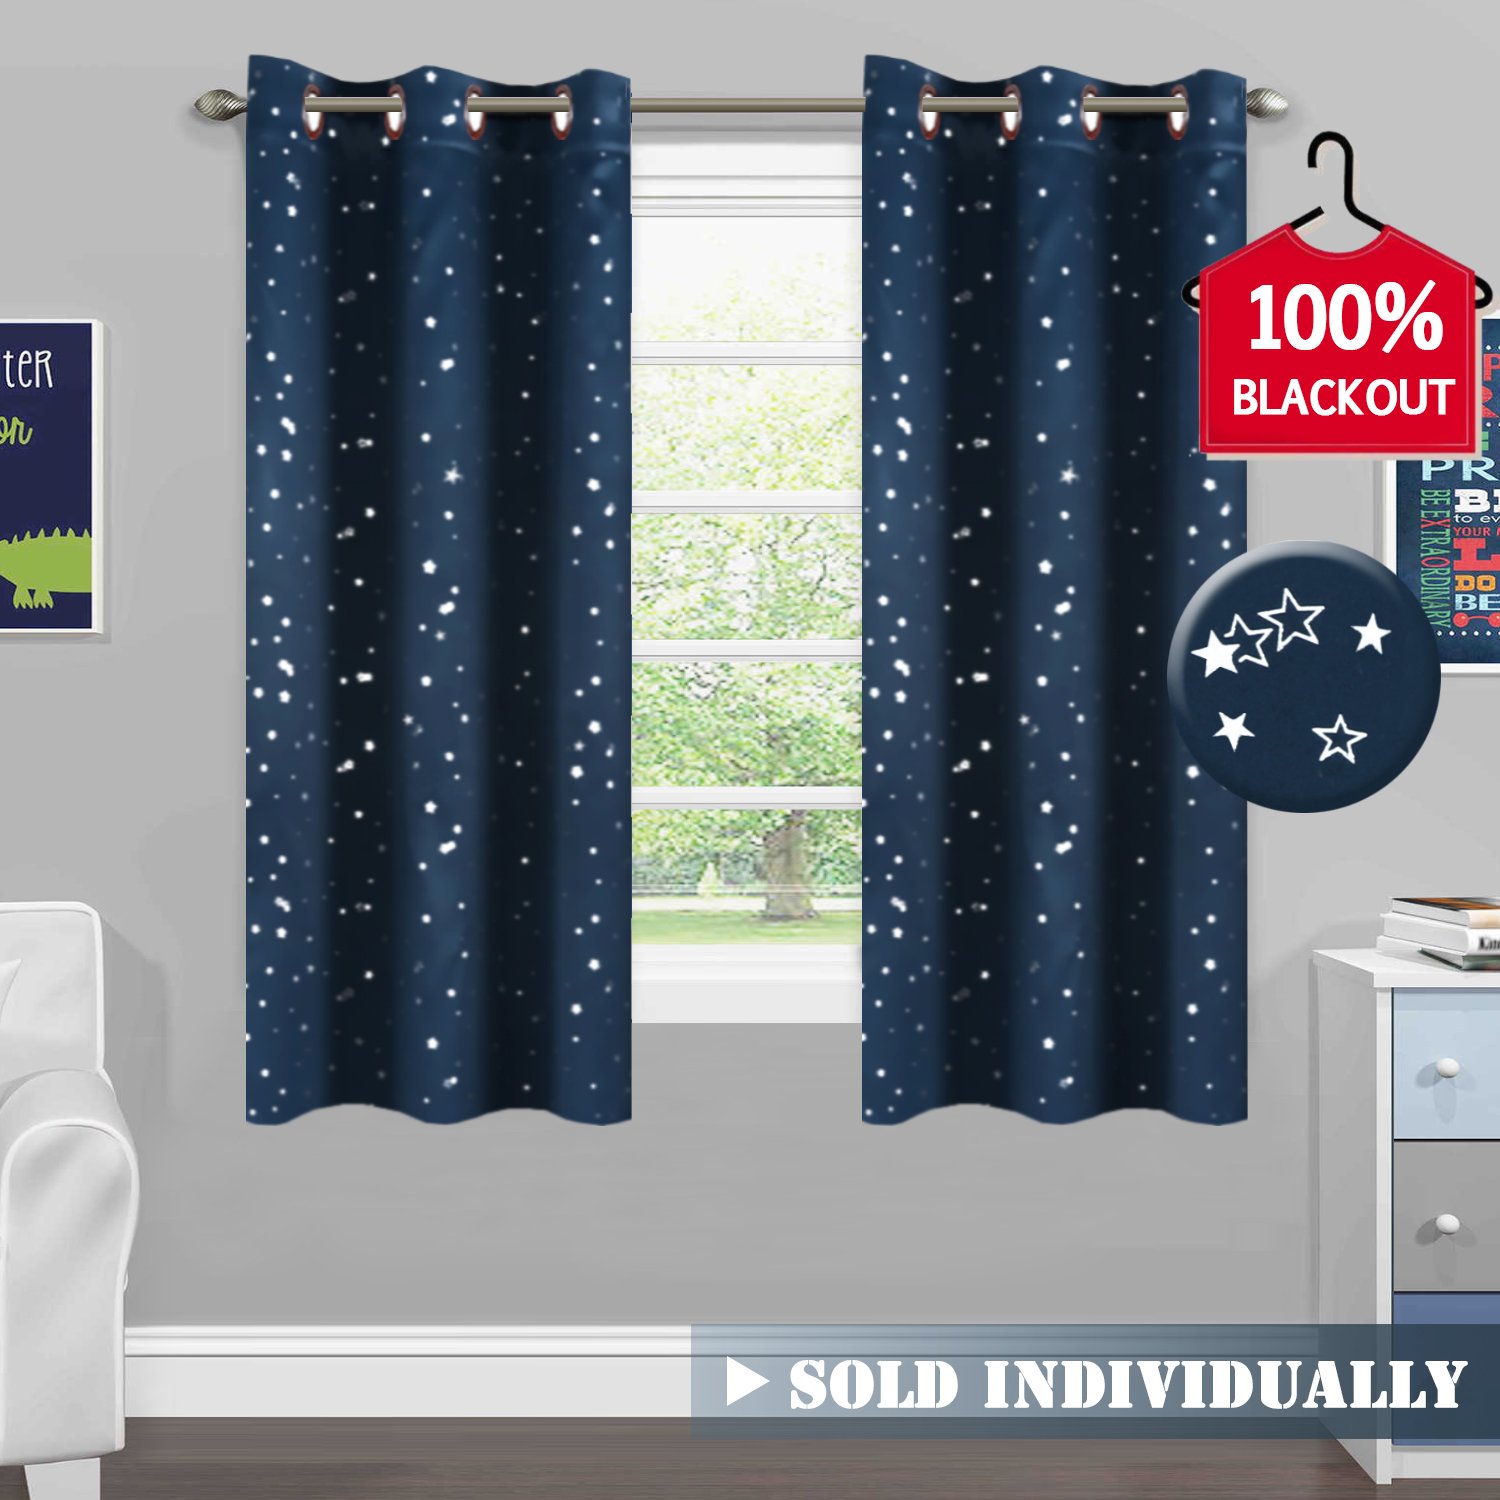 H.VERSAILTEX 100% Blackout Curtain Thermal Insulated Navy Stars Kids Room Curtain Panels Antique Grommet Window Treatments for Short Window